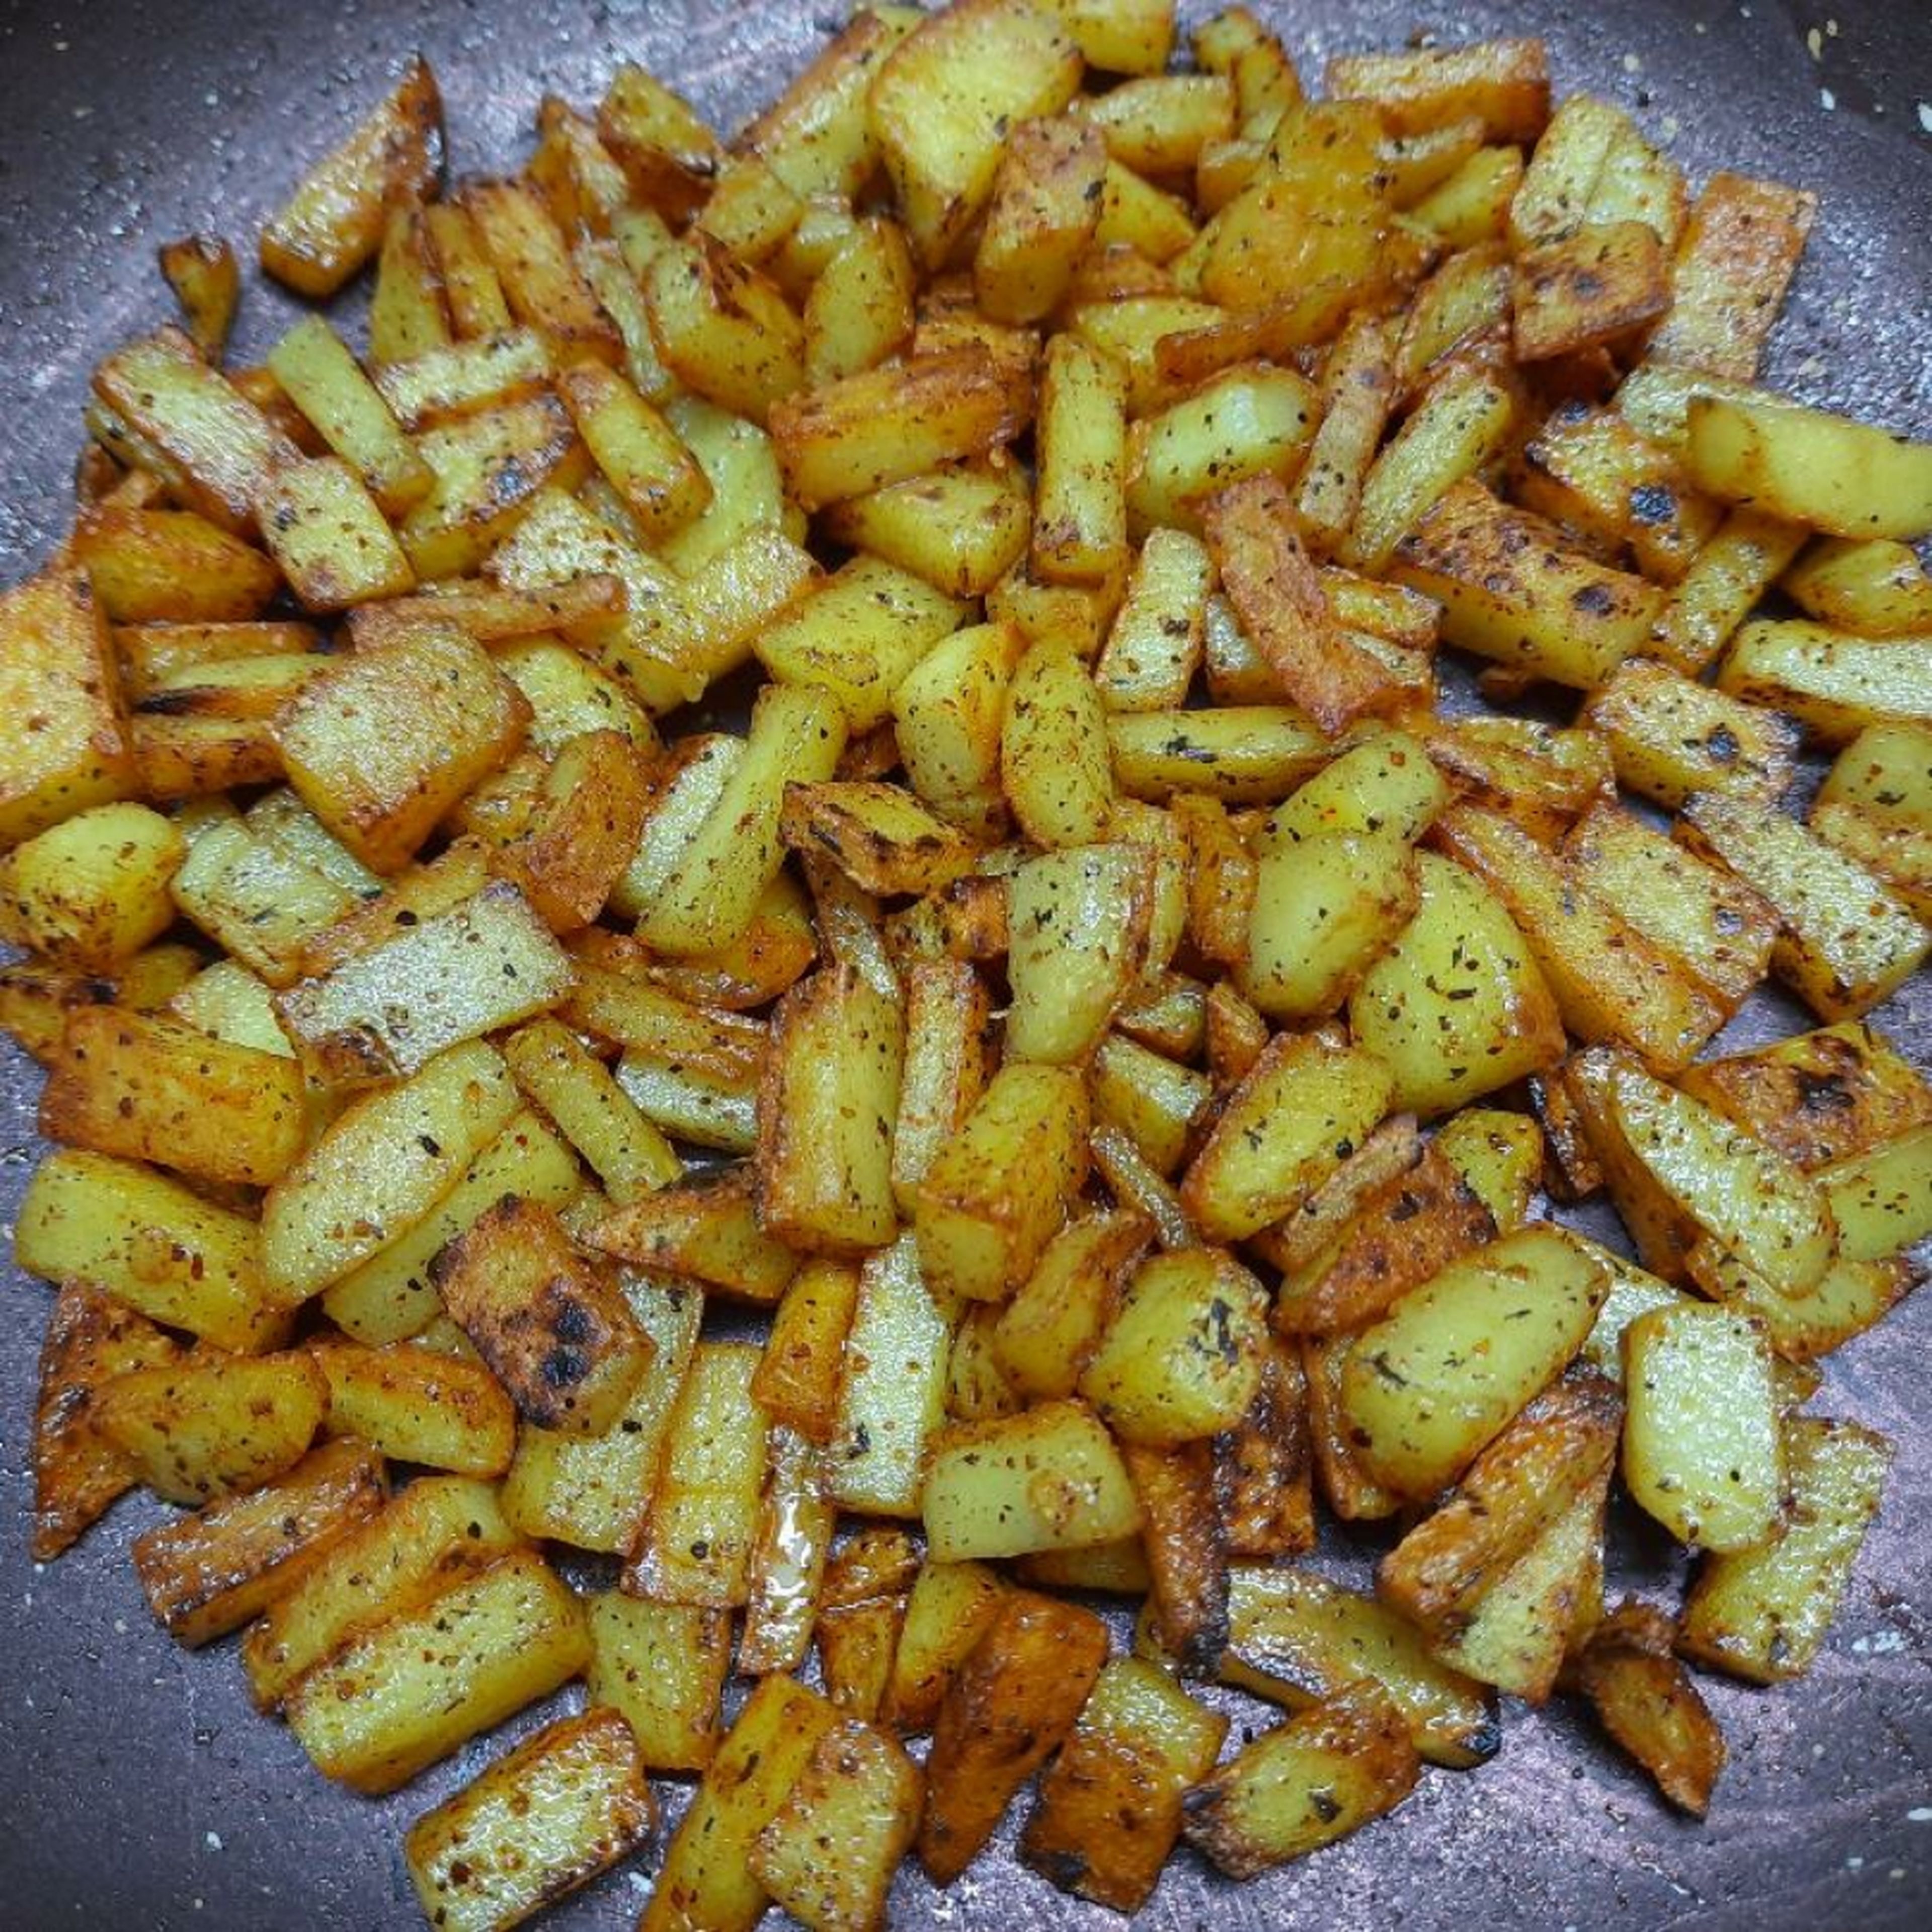 Potatoes should turn brown. They will become slightly crispy. Try to fry all sides evenly. Don't char the pieces. Immediately turn off flame if you see fumes coming out of pan. Your curry is ready! Serve hot.